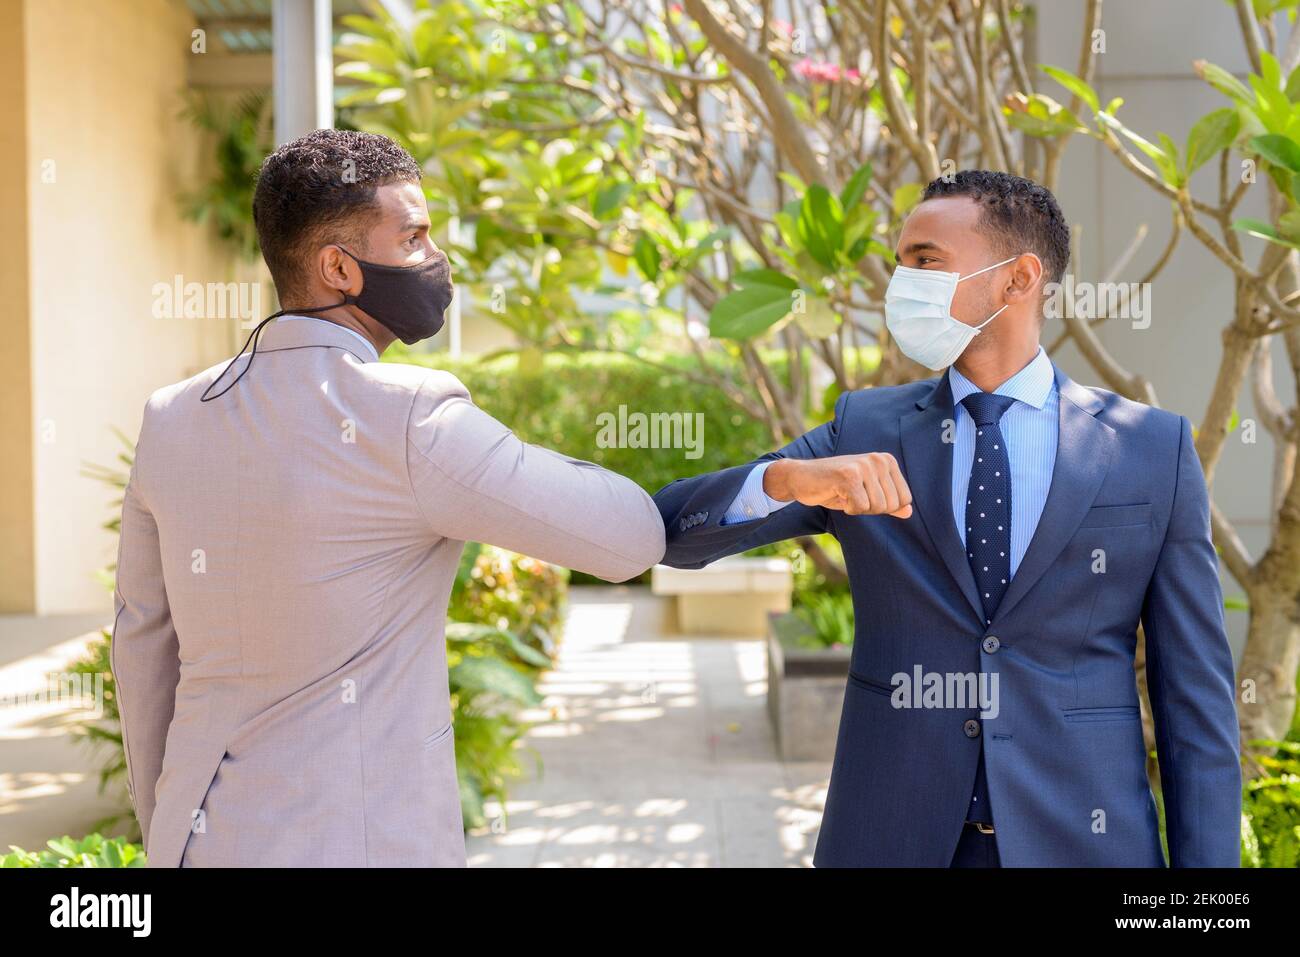 Two African businessman wearing medical mask while greeting with elbow bump greeting. Social distance concept during the coronavirus epidemic. Stock Photo